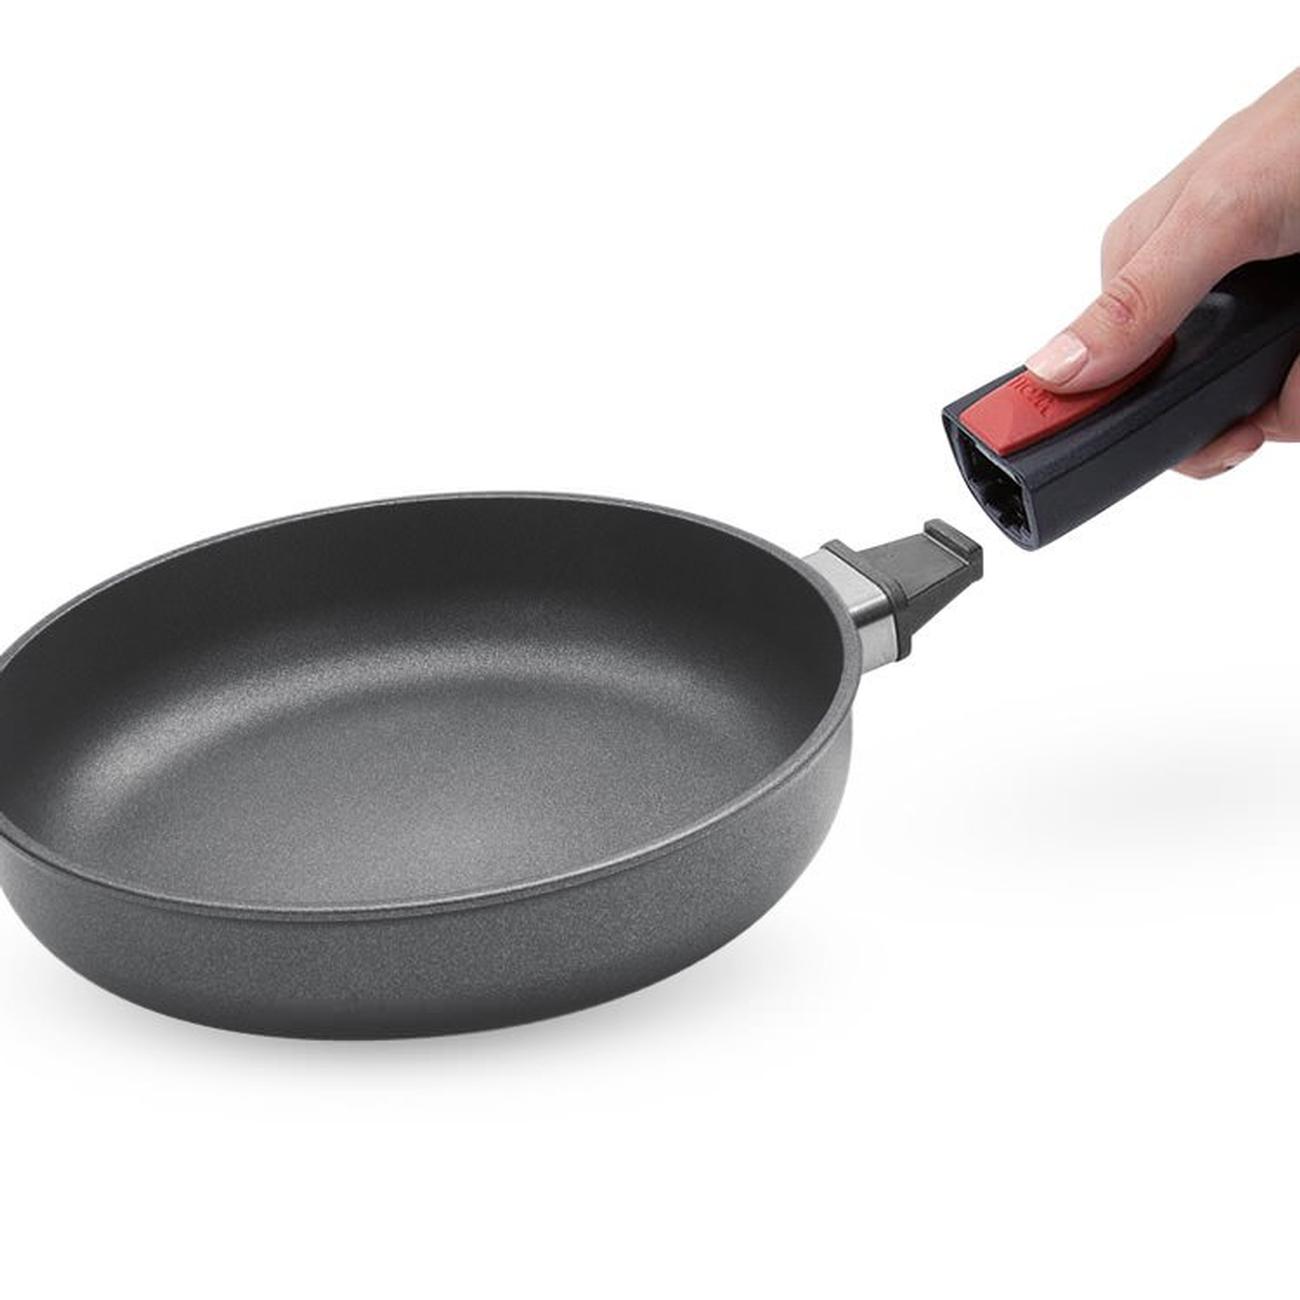 https://www.thekitchenwhisk.ie/contentfiles/productImages/Large/FryPan24cm1.jpg